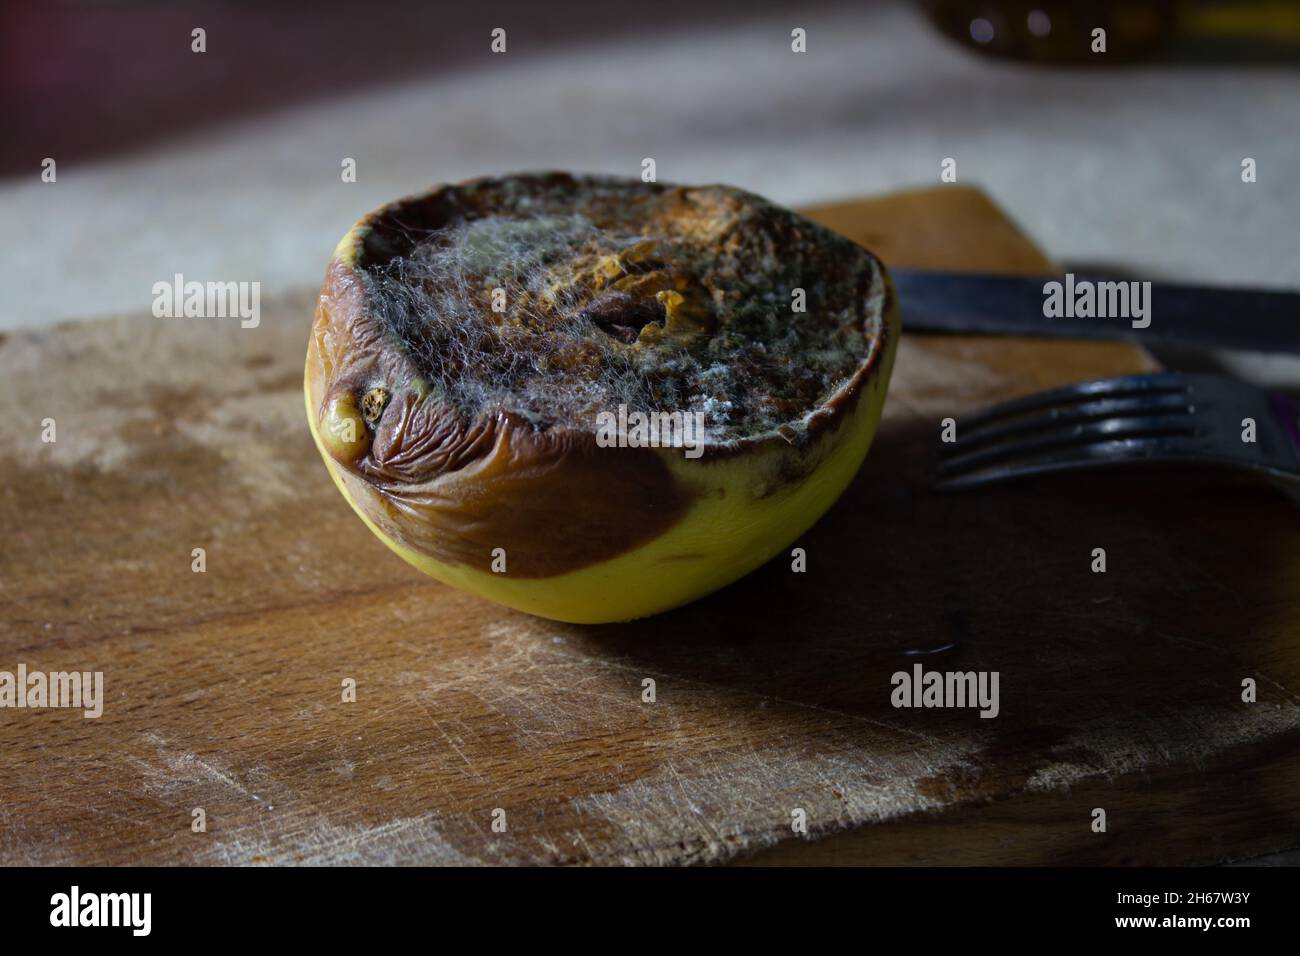 A moldy quince on a wooden cutting board with knife and fork at the side of it. Stock Photo